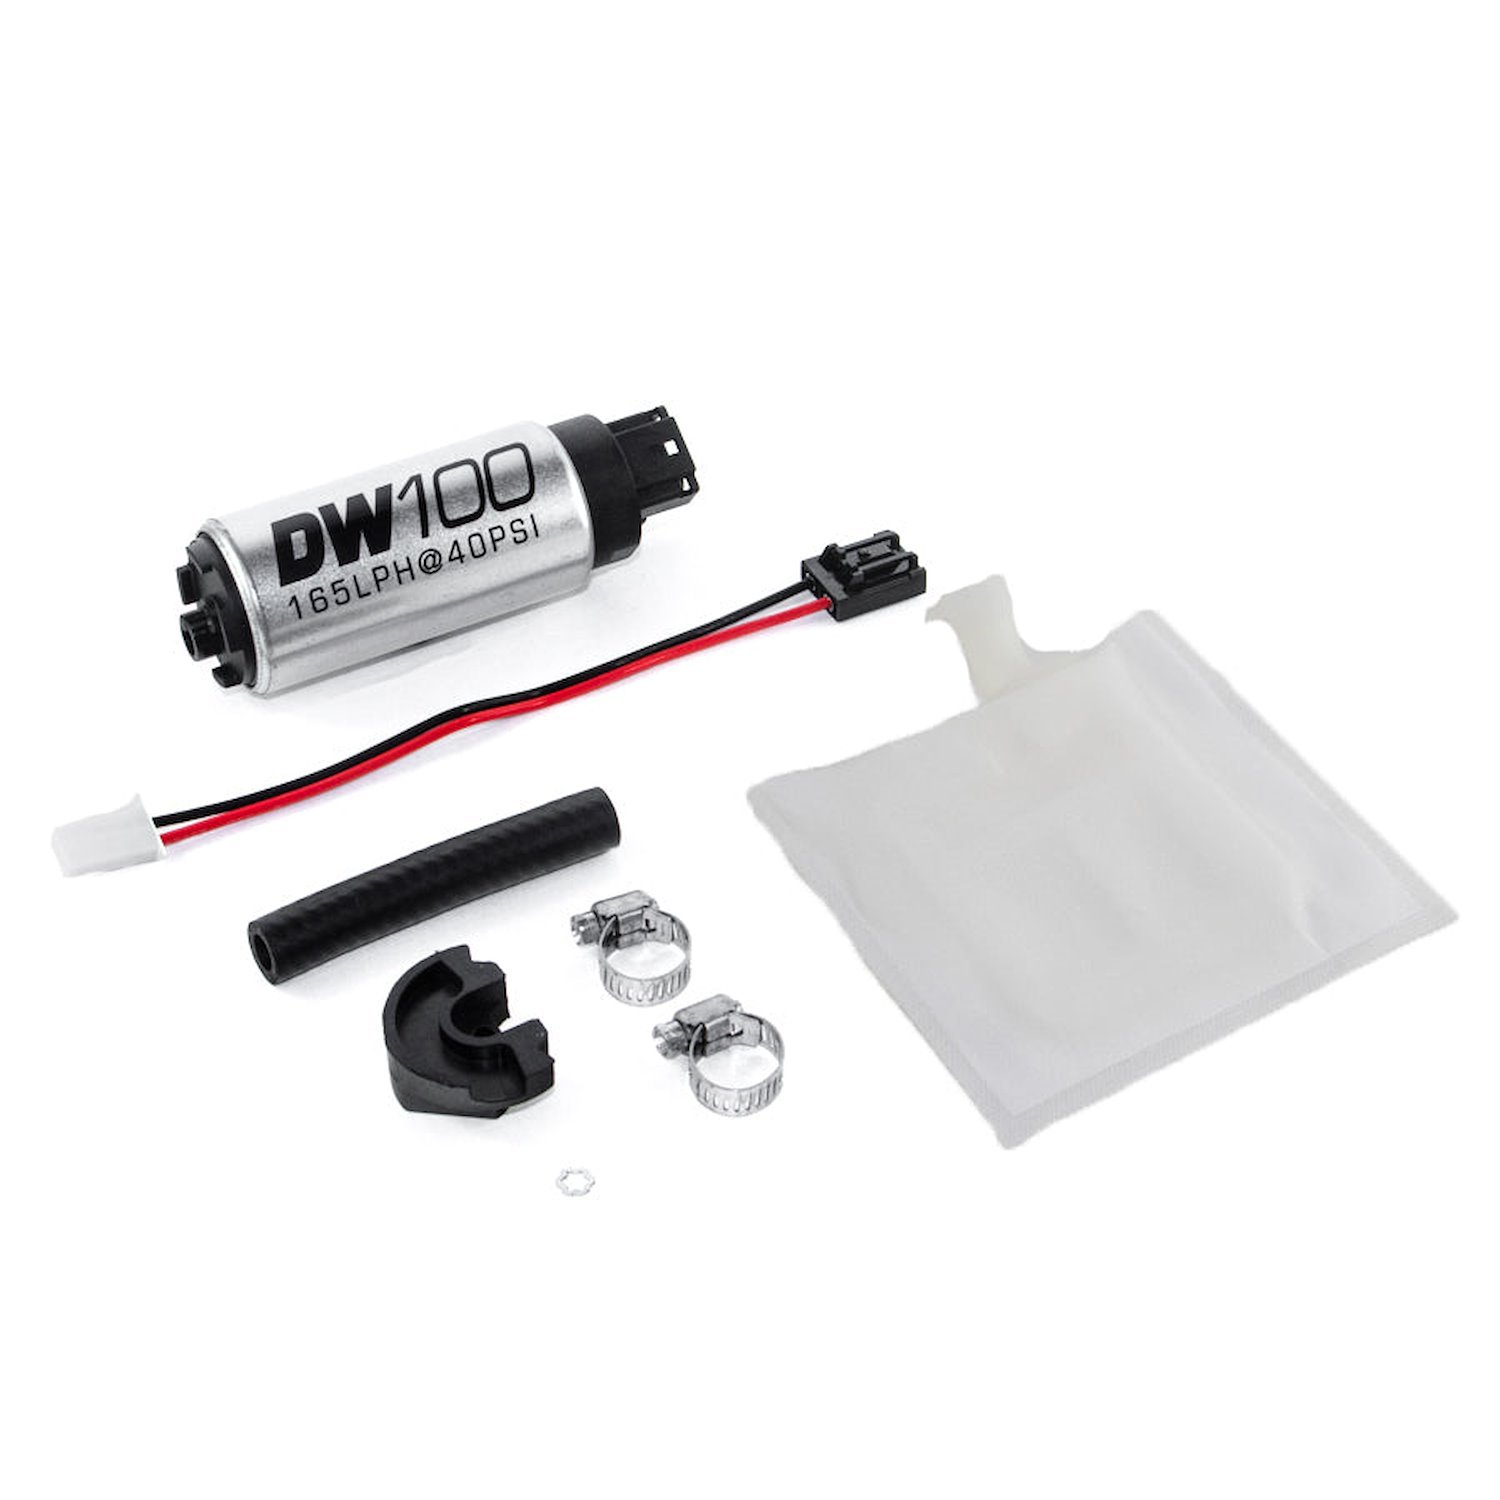 91010791 DW100 Series 165lph In-tank Fuel Pump w/ Install Kit for Subaru Impreza 93-07, Legacy 90-99 and 05-07